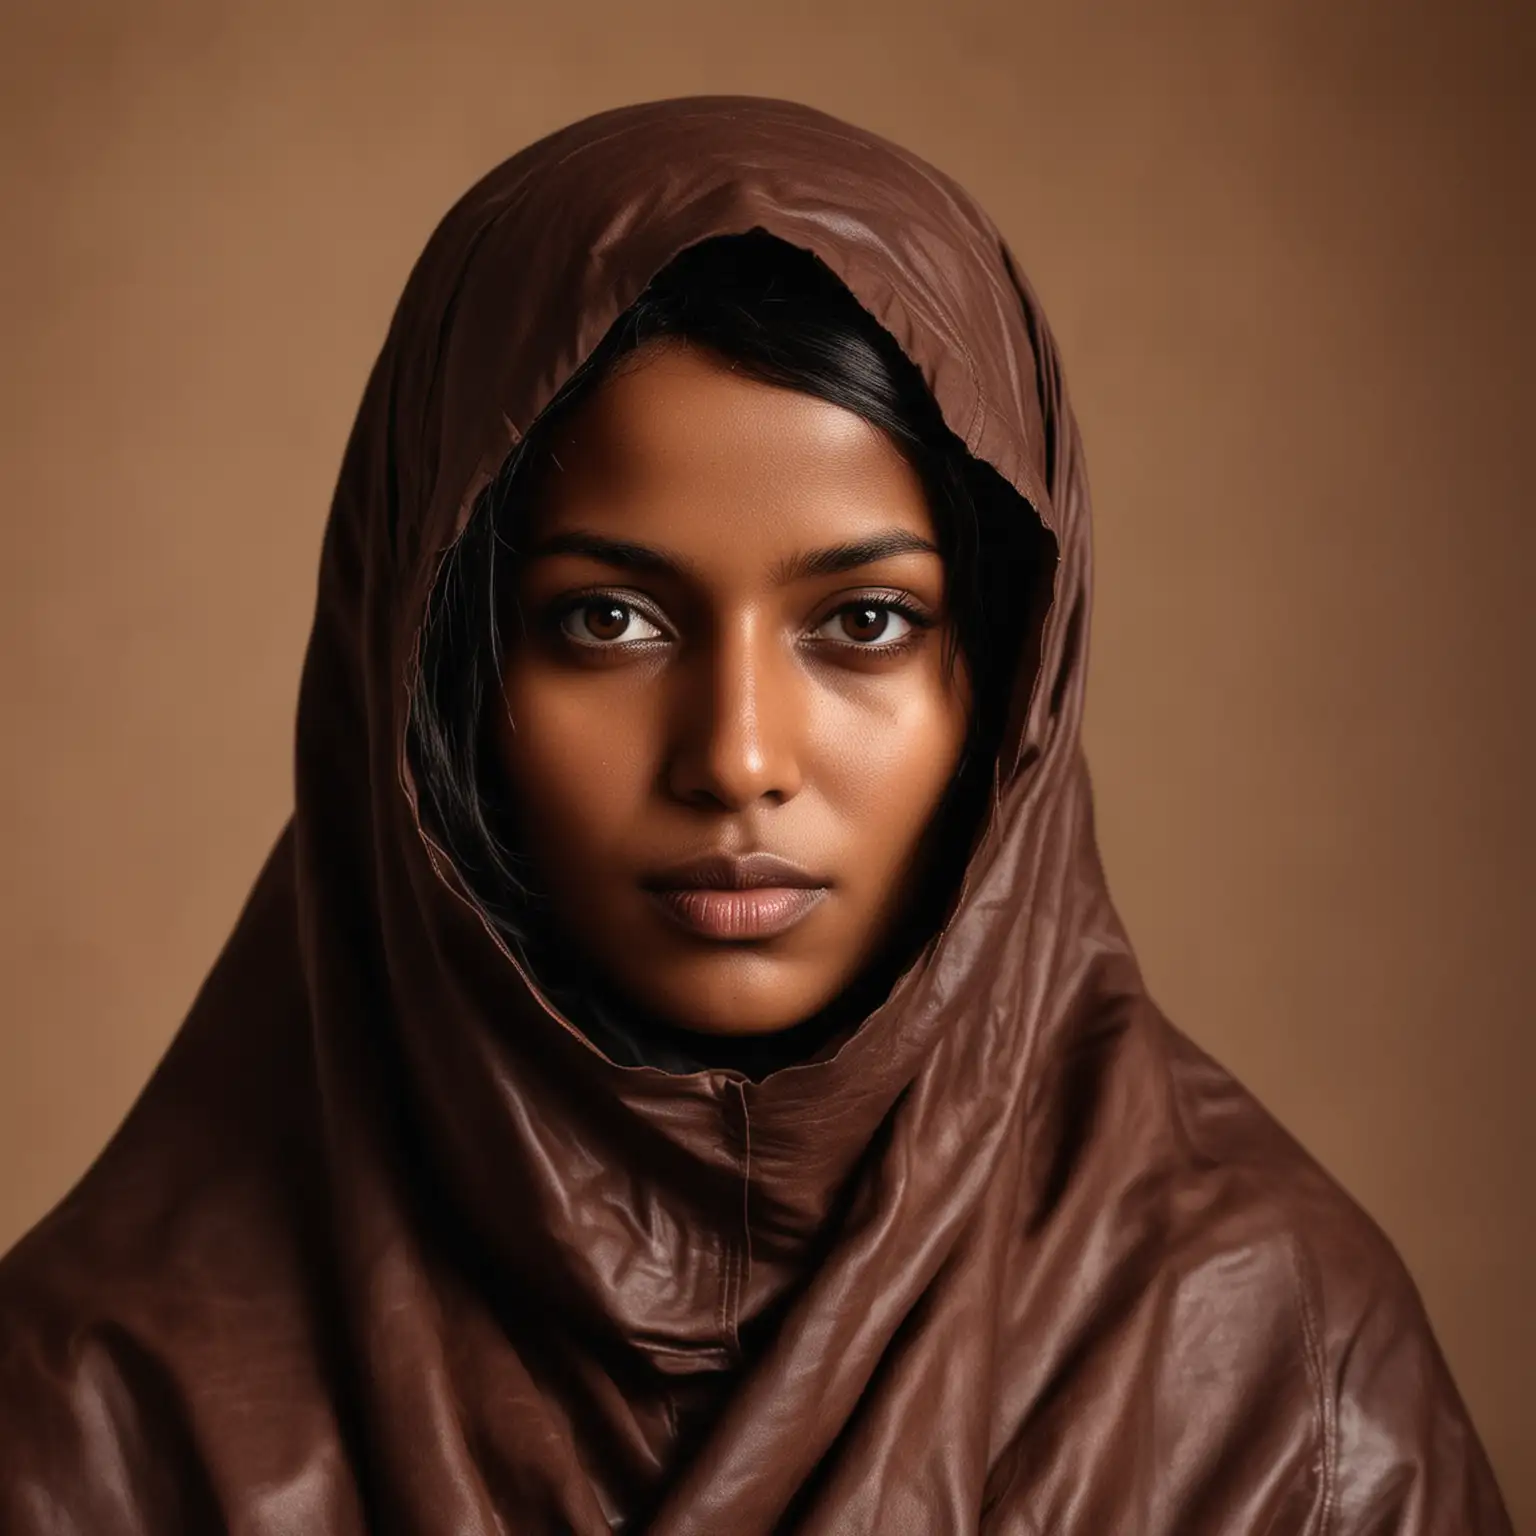 Modern Somali Woman in Burka and Leather Jacket